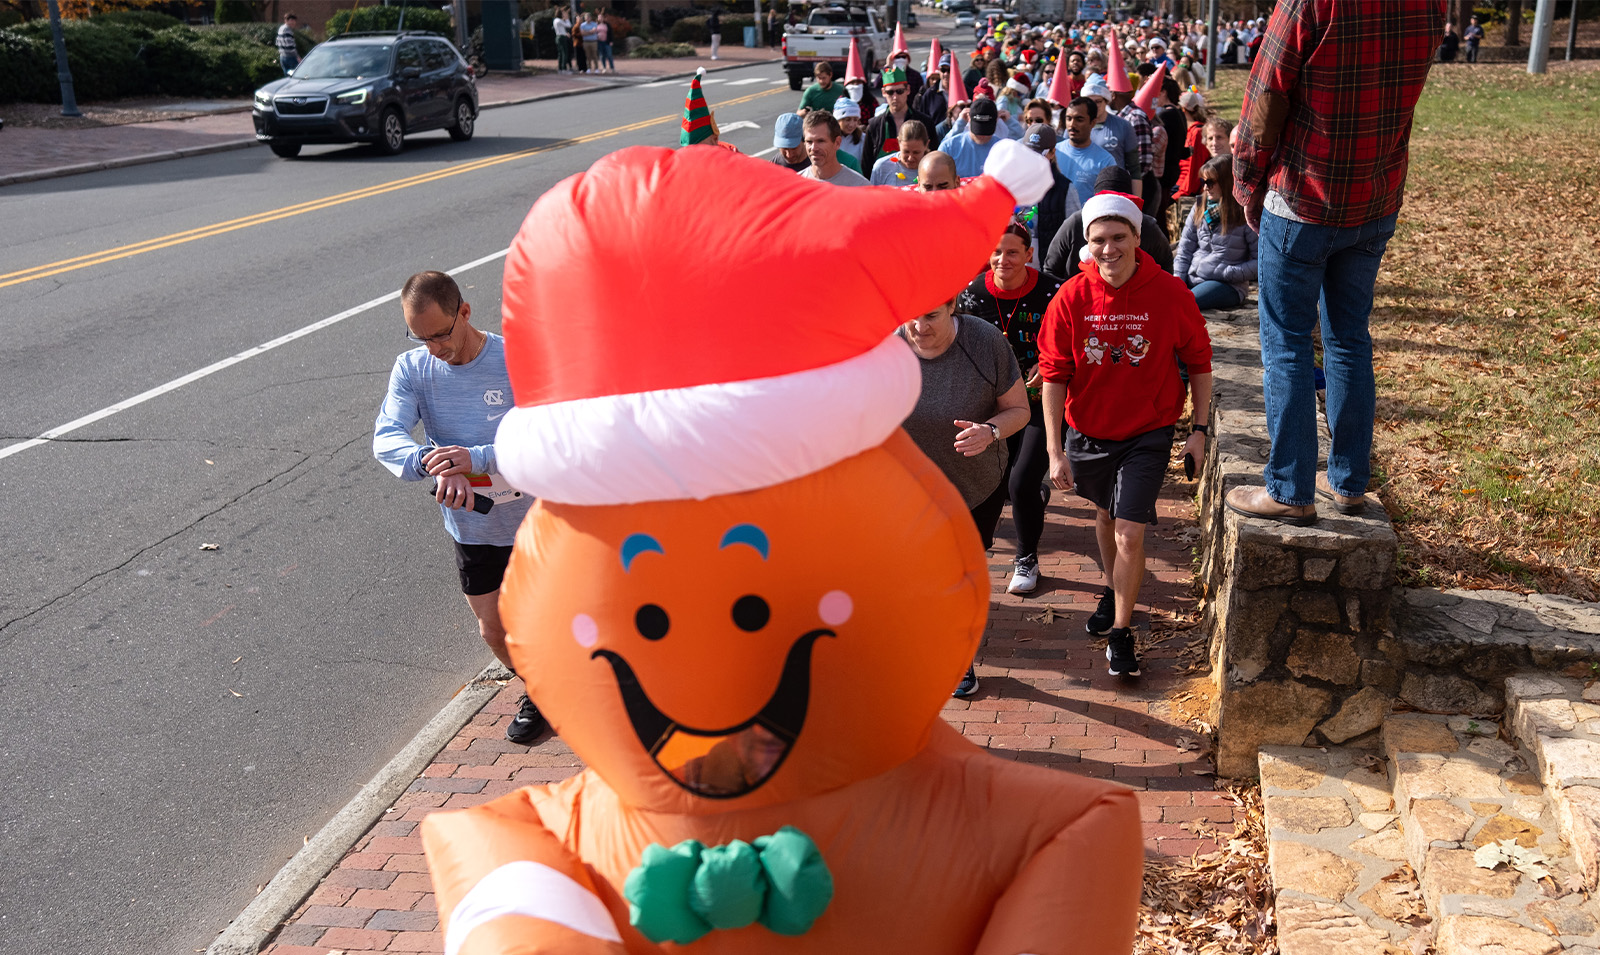 A person dressed up in a Gingerbread Man costume leading a group of joggers.